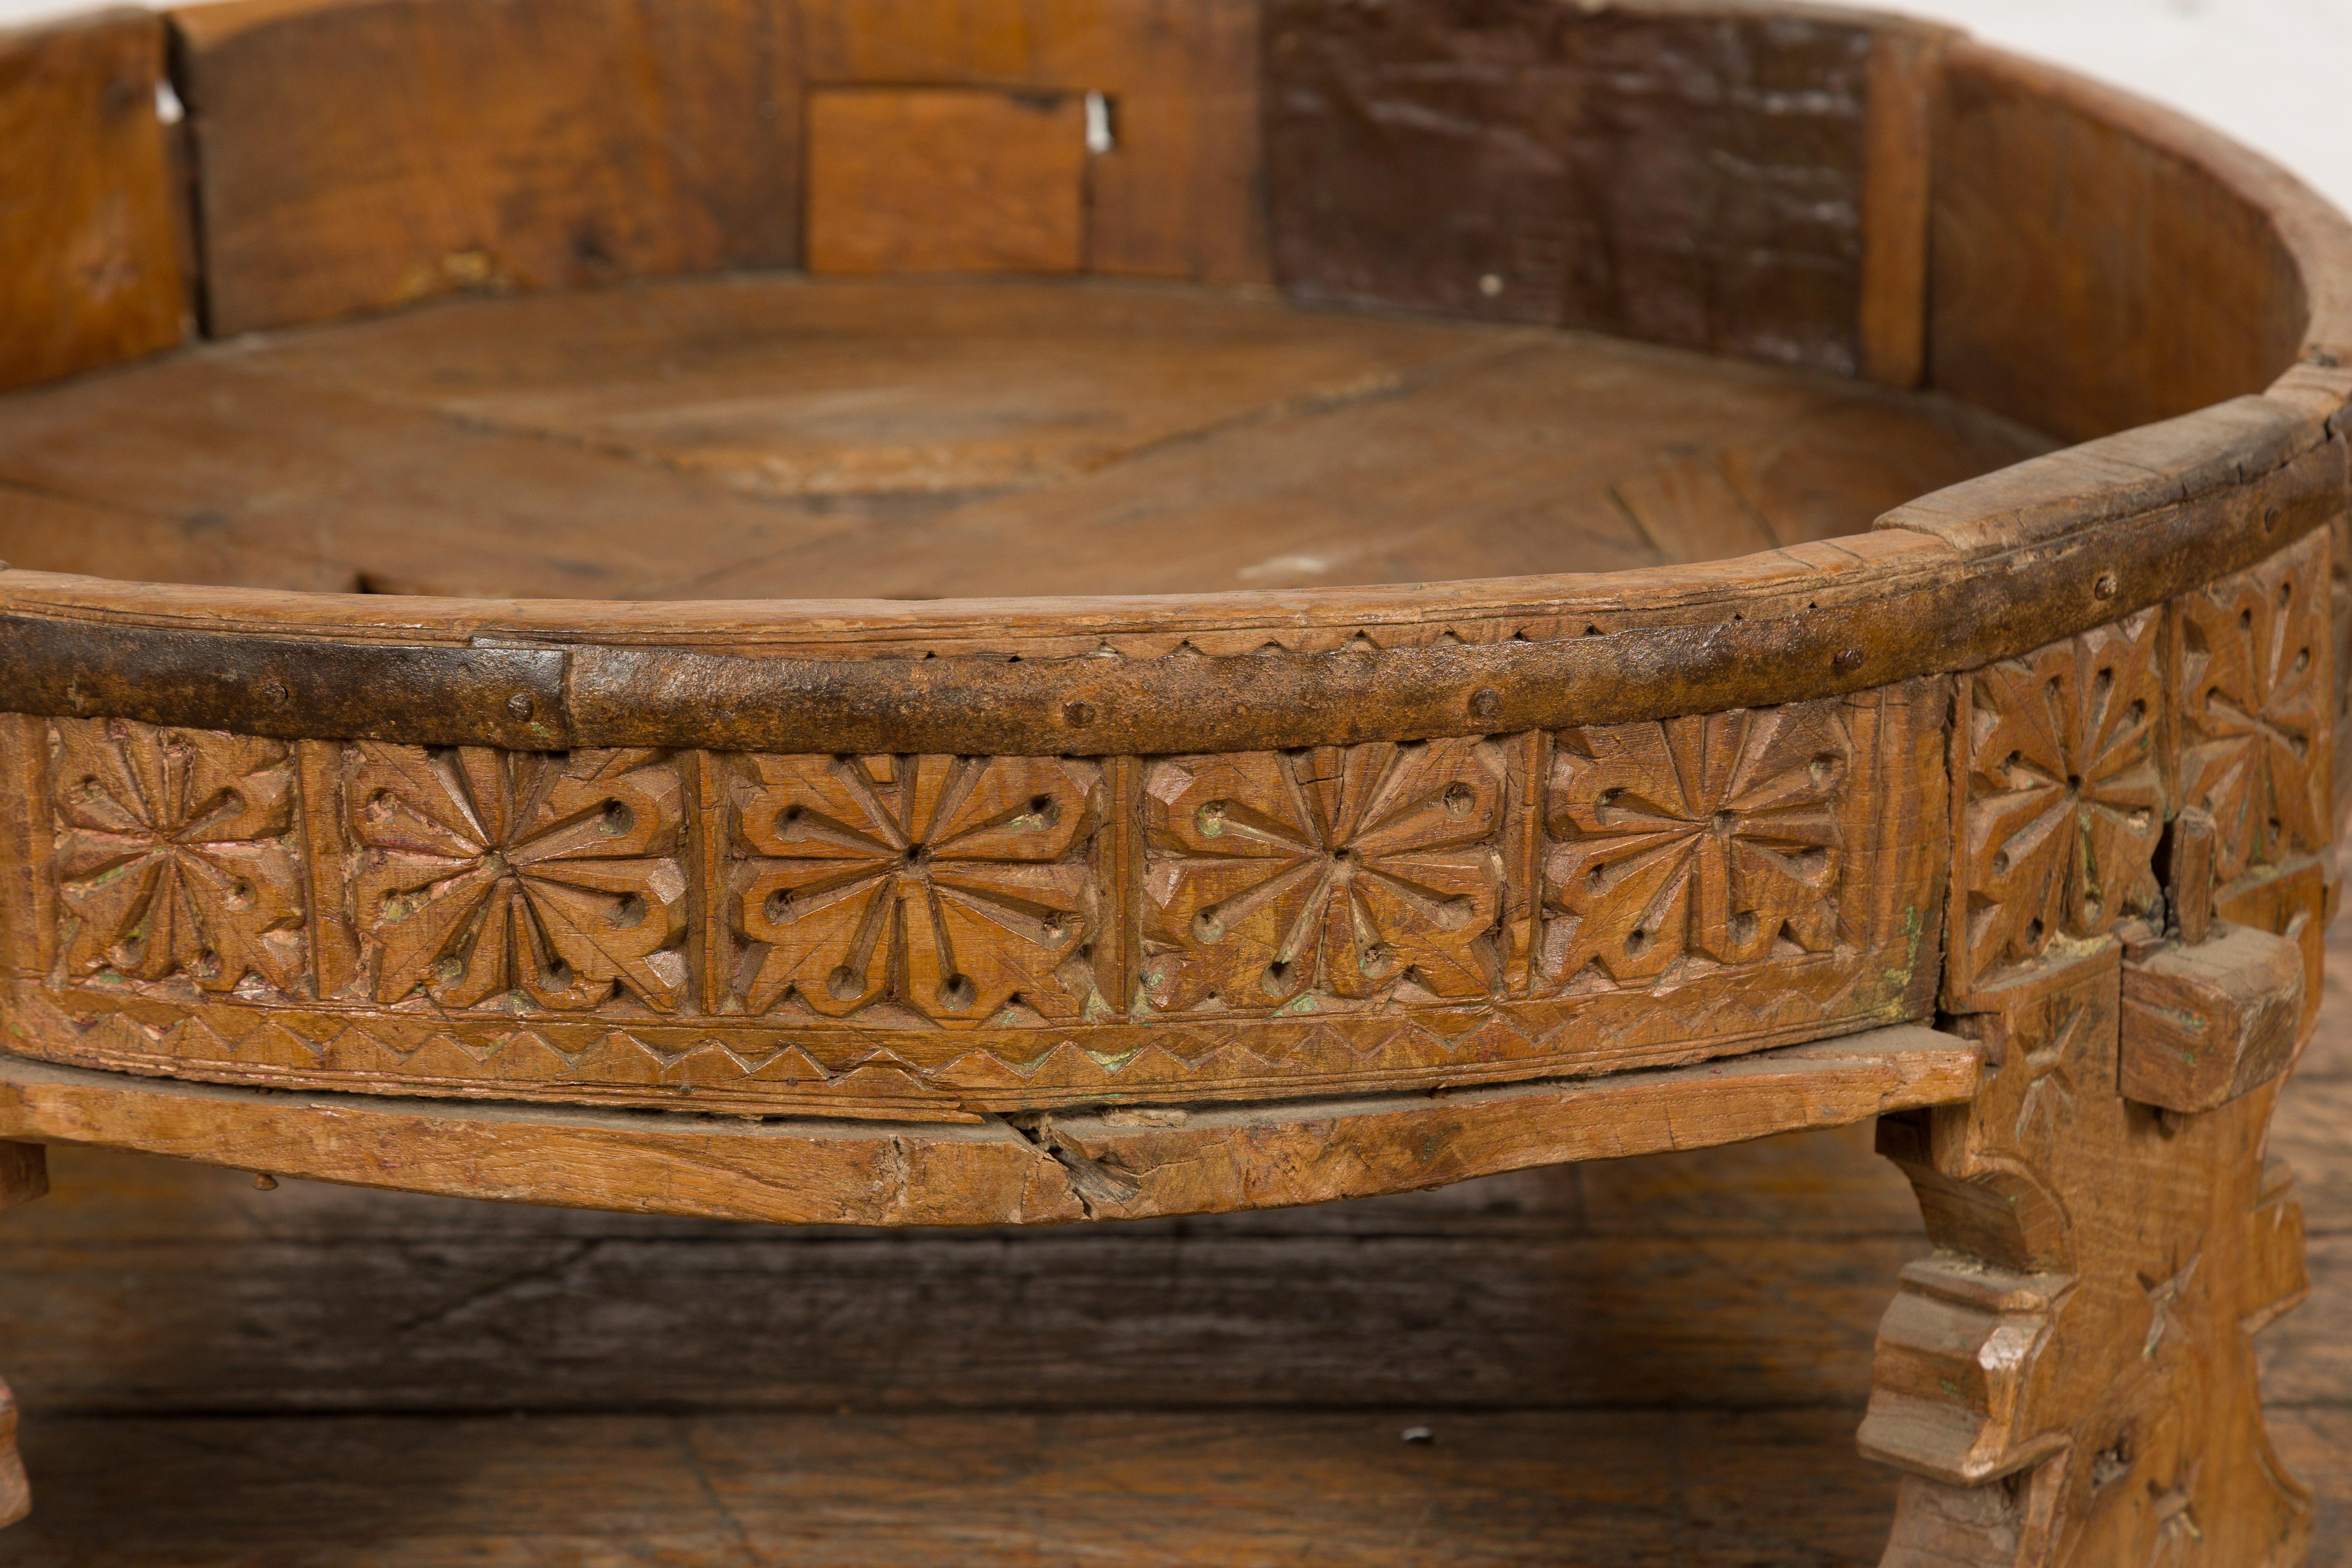 20th Century Indian Tribal 1920s Teak Chakki Grinding Table with Geometric Hand-Carved Motifs For Sale